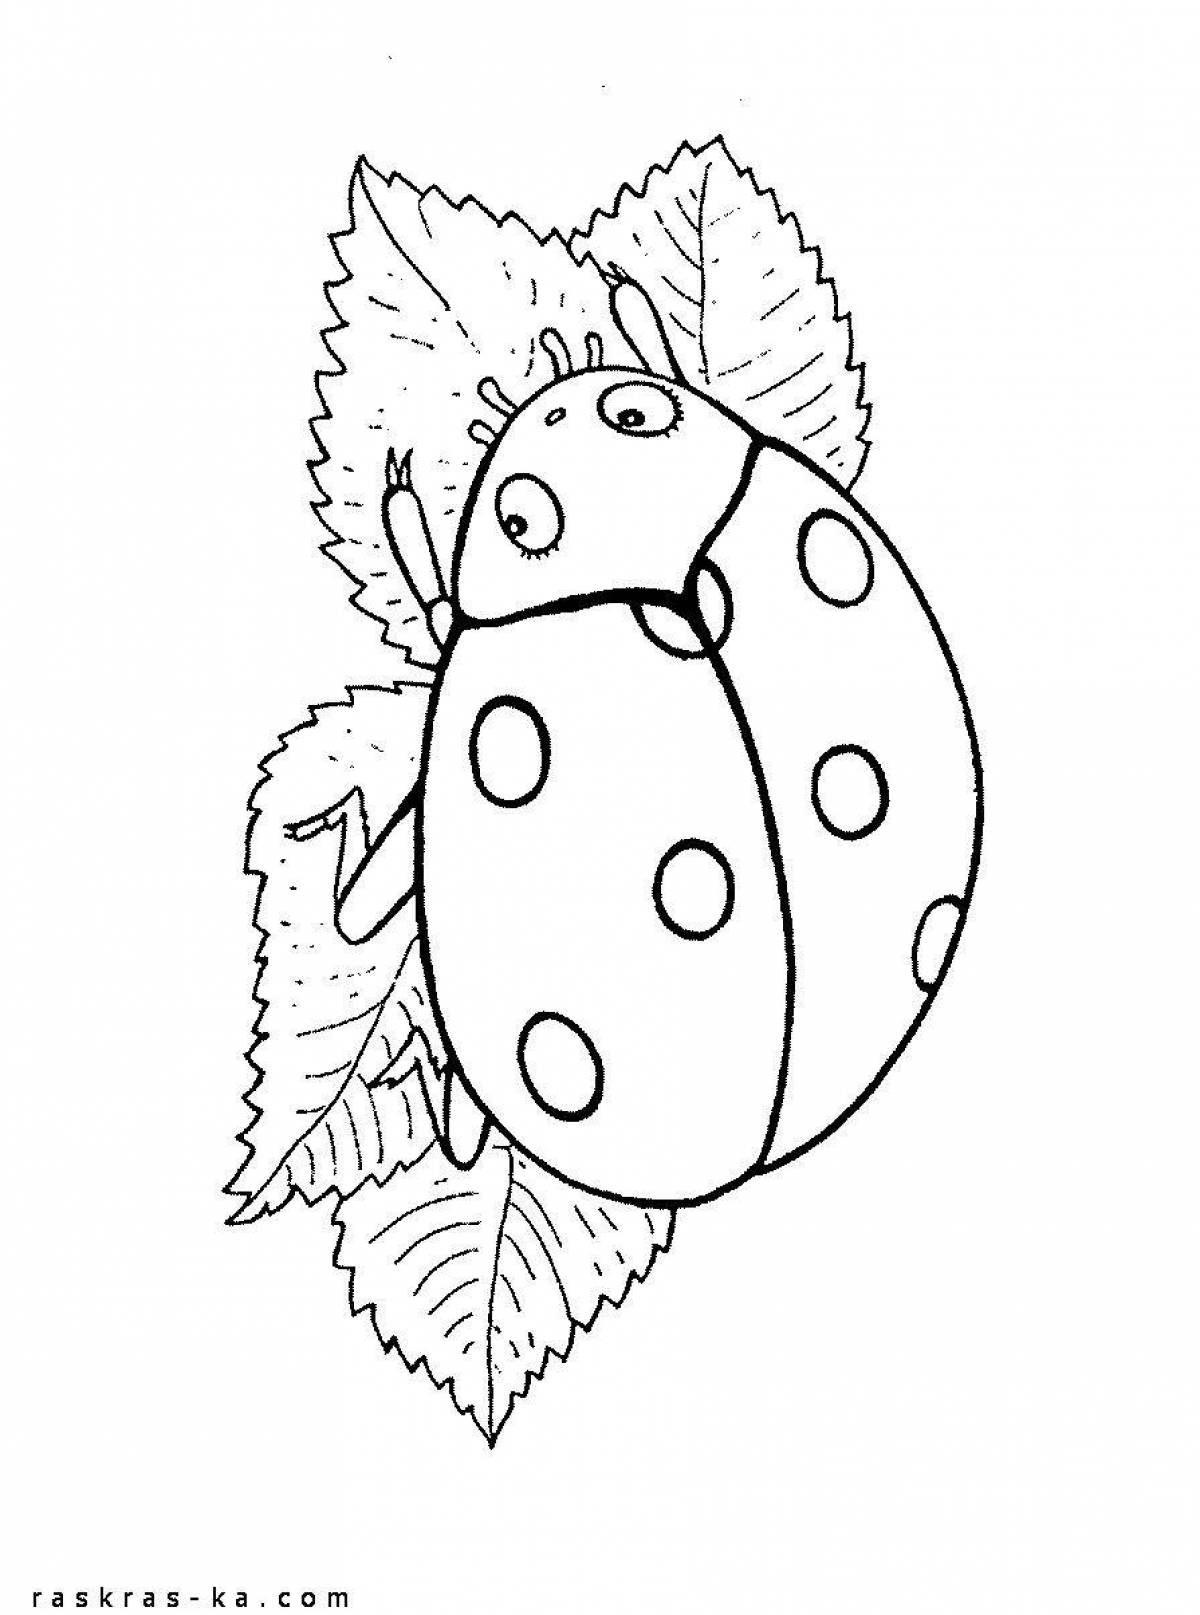 Inspirational ladybug coloring book for toddlers